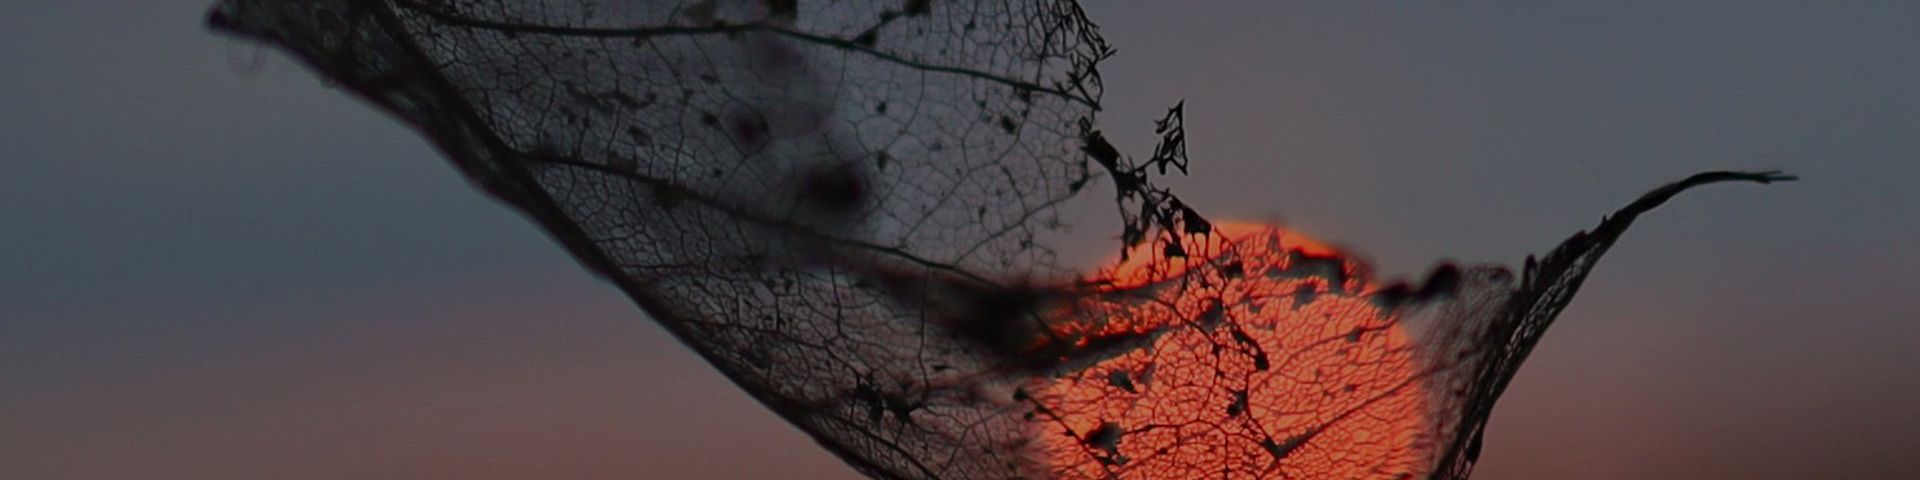 The sun is burning a deep orange, which can be seen through the silhouette of a leaf. A dark sky forms the backdrop of the photo.